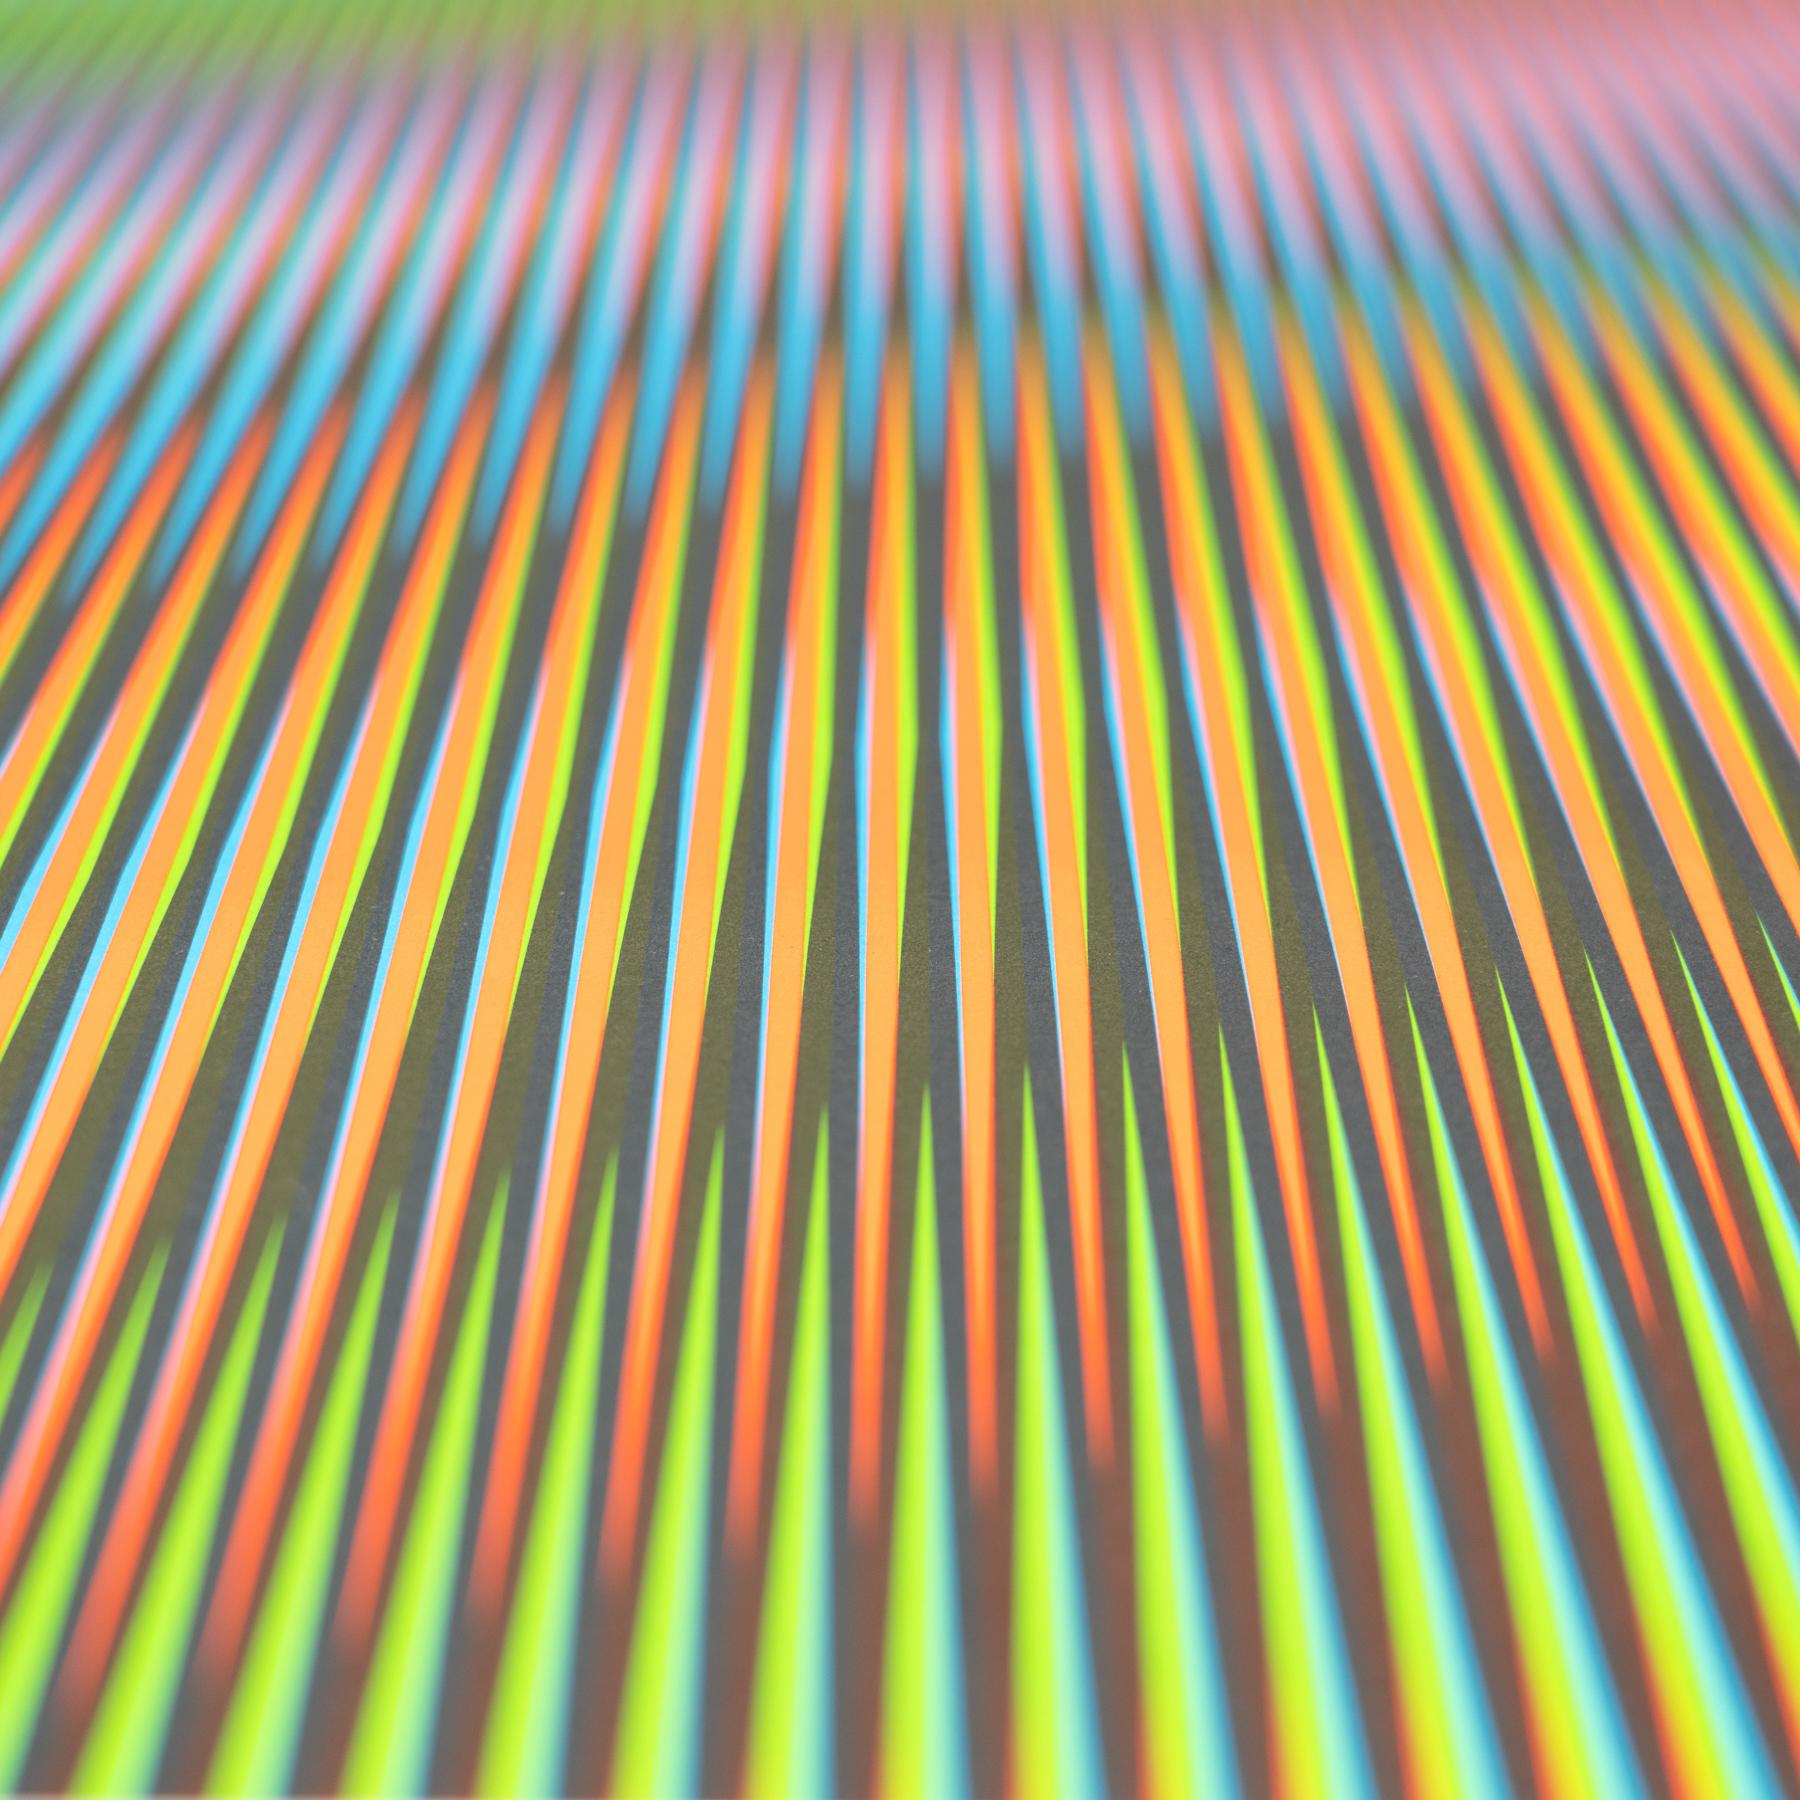 'Friday' color lithograph from the Week Series. 

Made by Carlos Cruz-Diez in Venezuela, circa 2013.

Edition 75 hand signed.

About the artist:
Carlos Cruz-Diez’s vivid studies of color, light, pattern, and perception helped pioneer kinetic